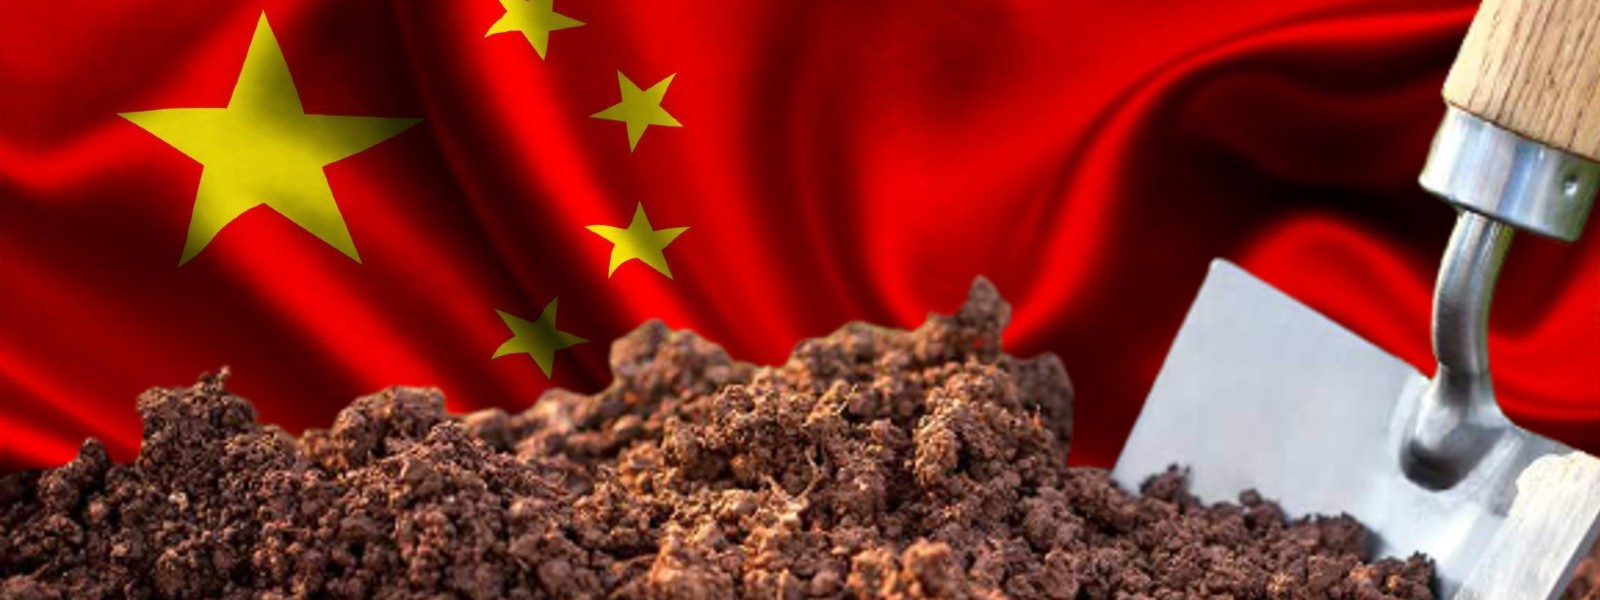 Sri Lankan government acts only for their own interests –  Qingdao Seawin Biotech Group